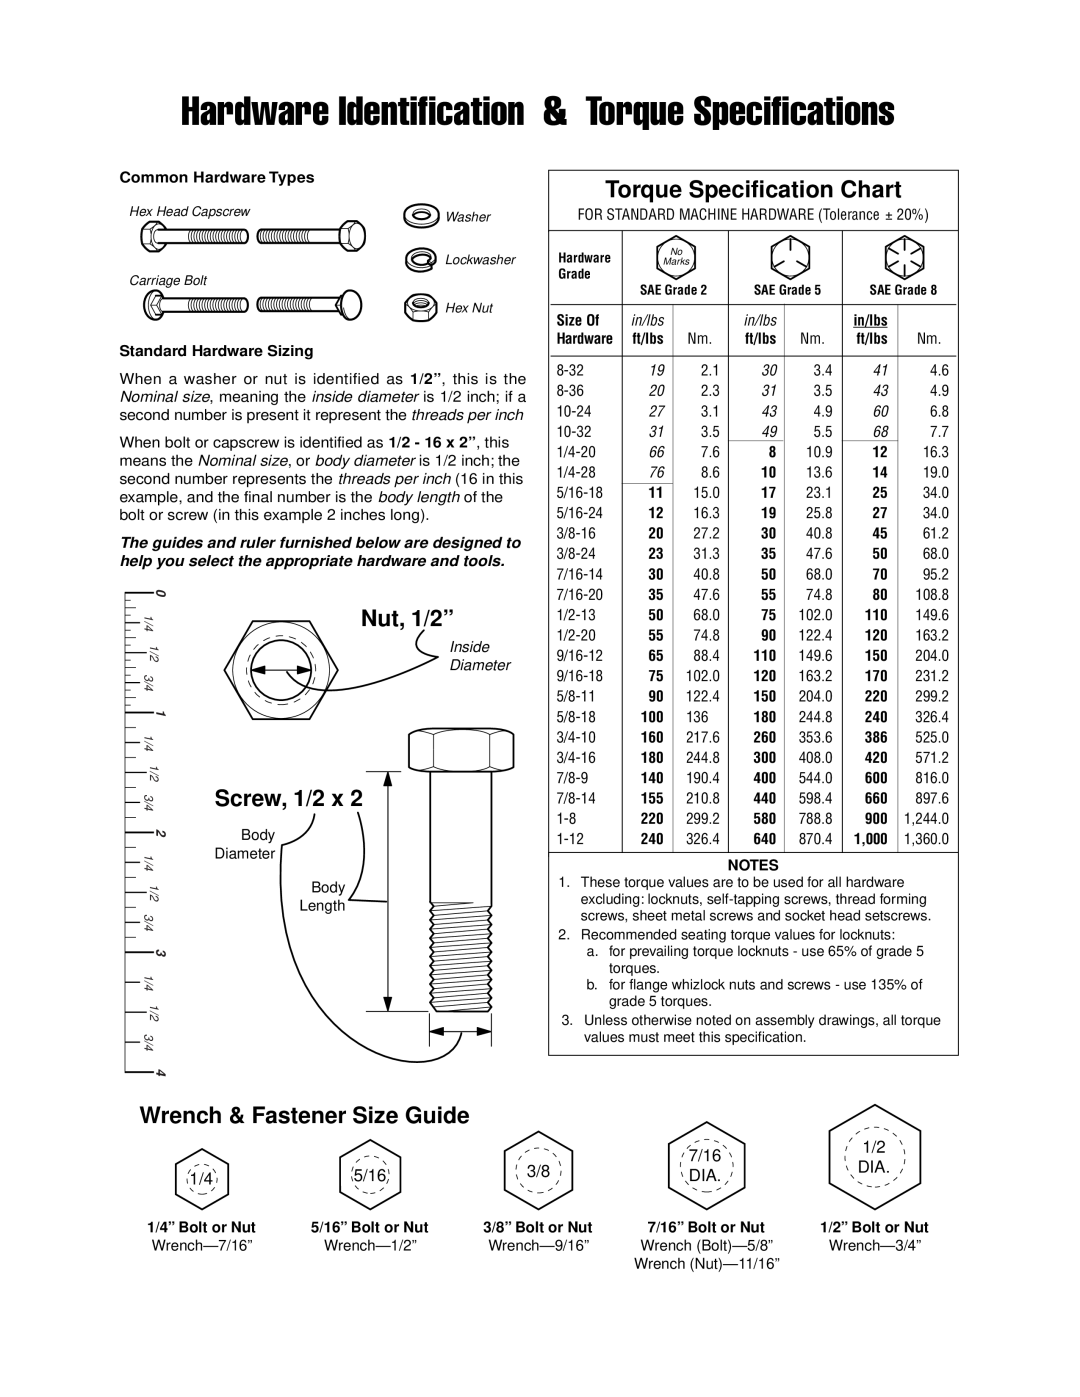 Snapper 4542 Torque Specification Chart, Wrench & Fastener Size Guide, Hardware Identification & Torque Specifications 